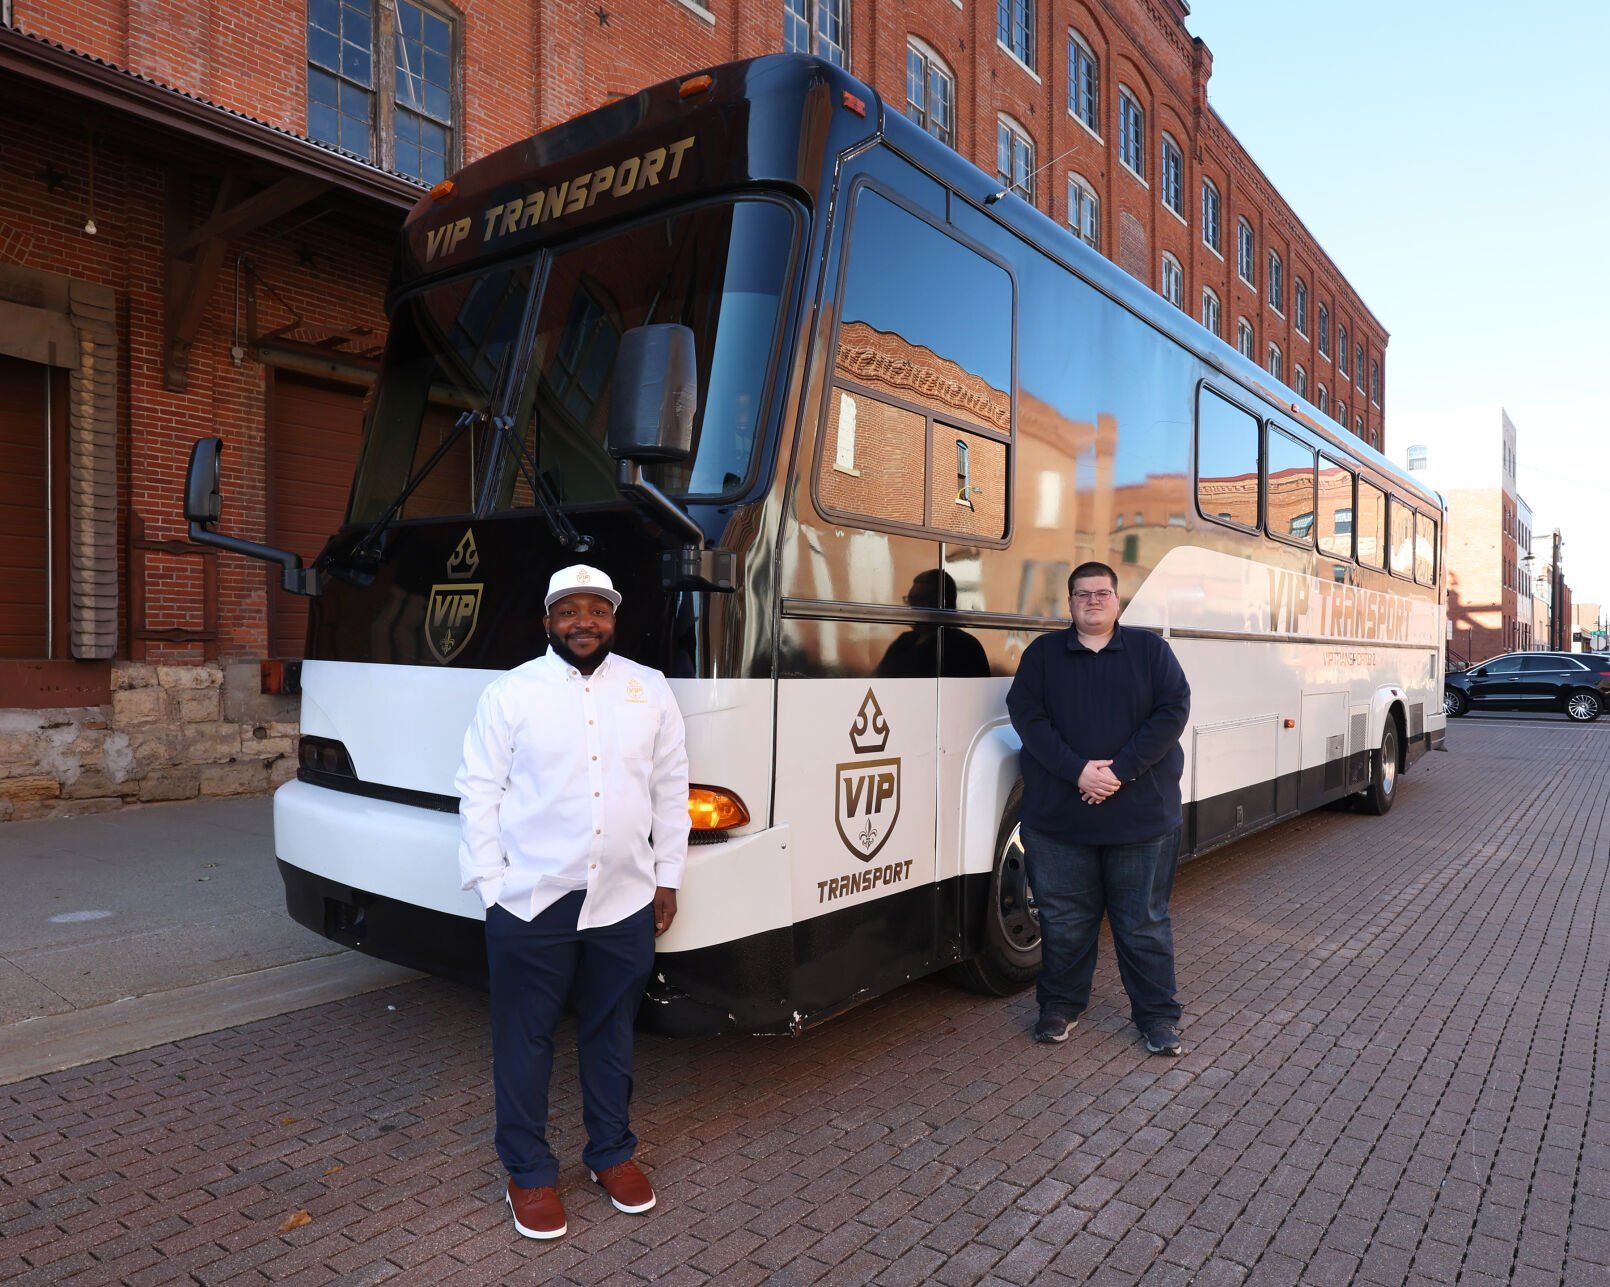 VIP Transport owners Dionte Stewart (left) and Ryan Elliott outside their bus in Dubuque on Thursday, Nov. 9, 2023.    PHOTO CREDIT: Stephen Gassman